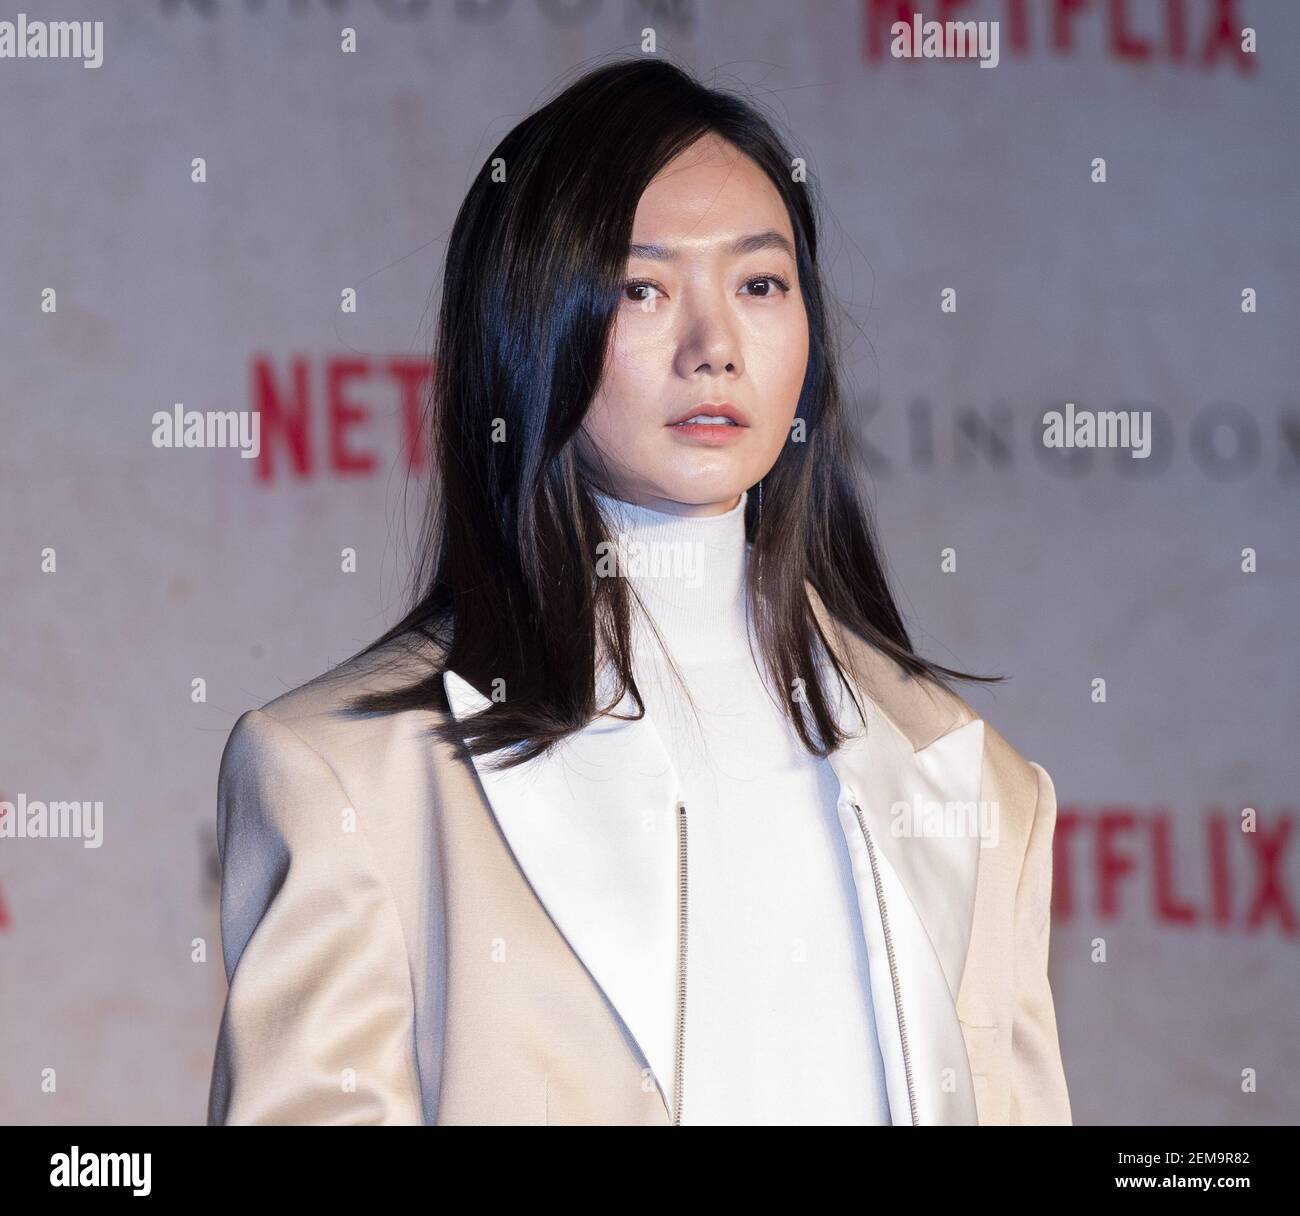 South Korean actress Bae Doo-na, attends photo call for the Netflix film ' Kingdom' press conference with South Korean director Kim Seong-hoon at  Intercontinental hotel in Seoul, South Korea on January 21, 2019.